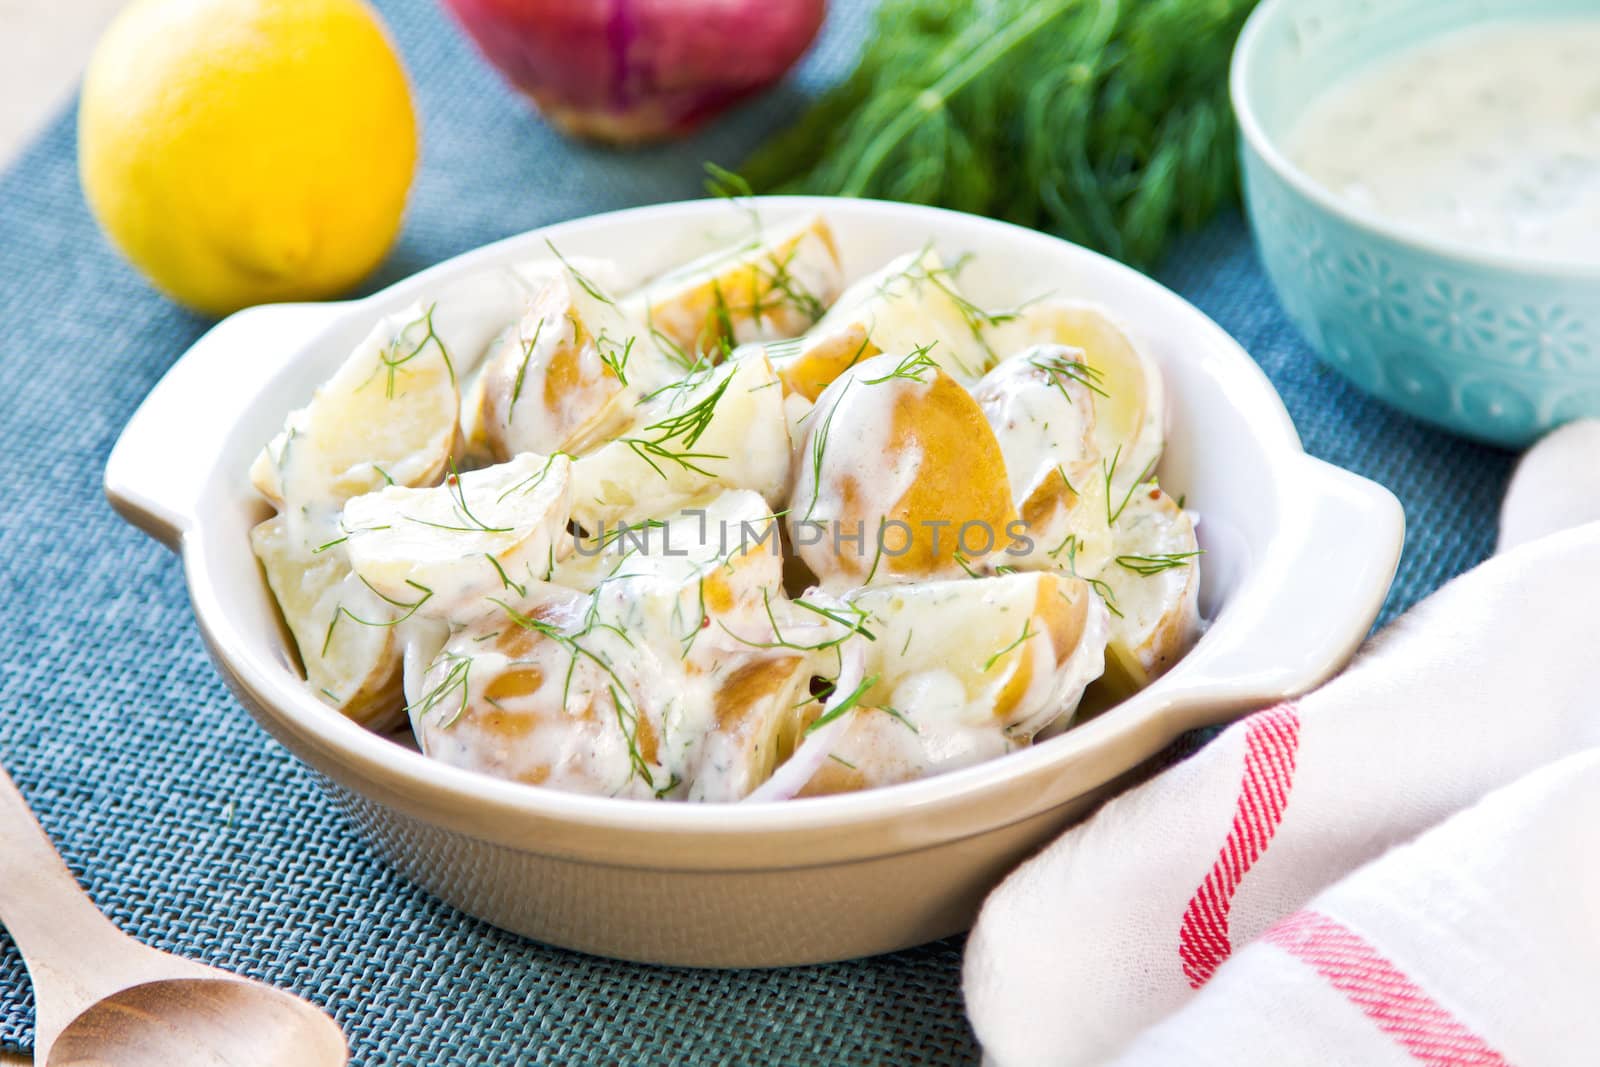 Potato with dill in sour cream dressing salad